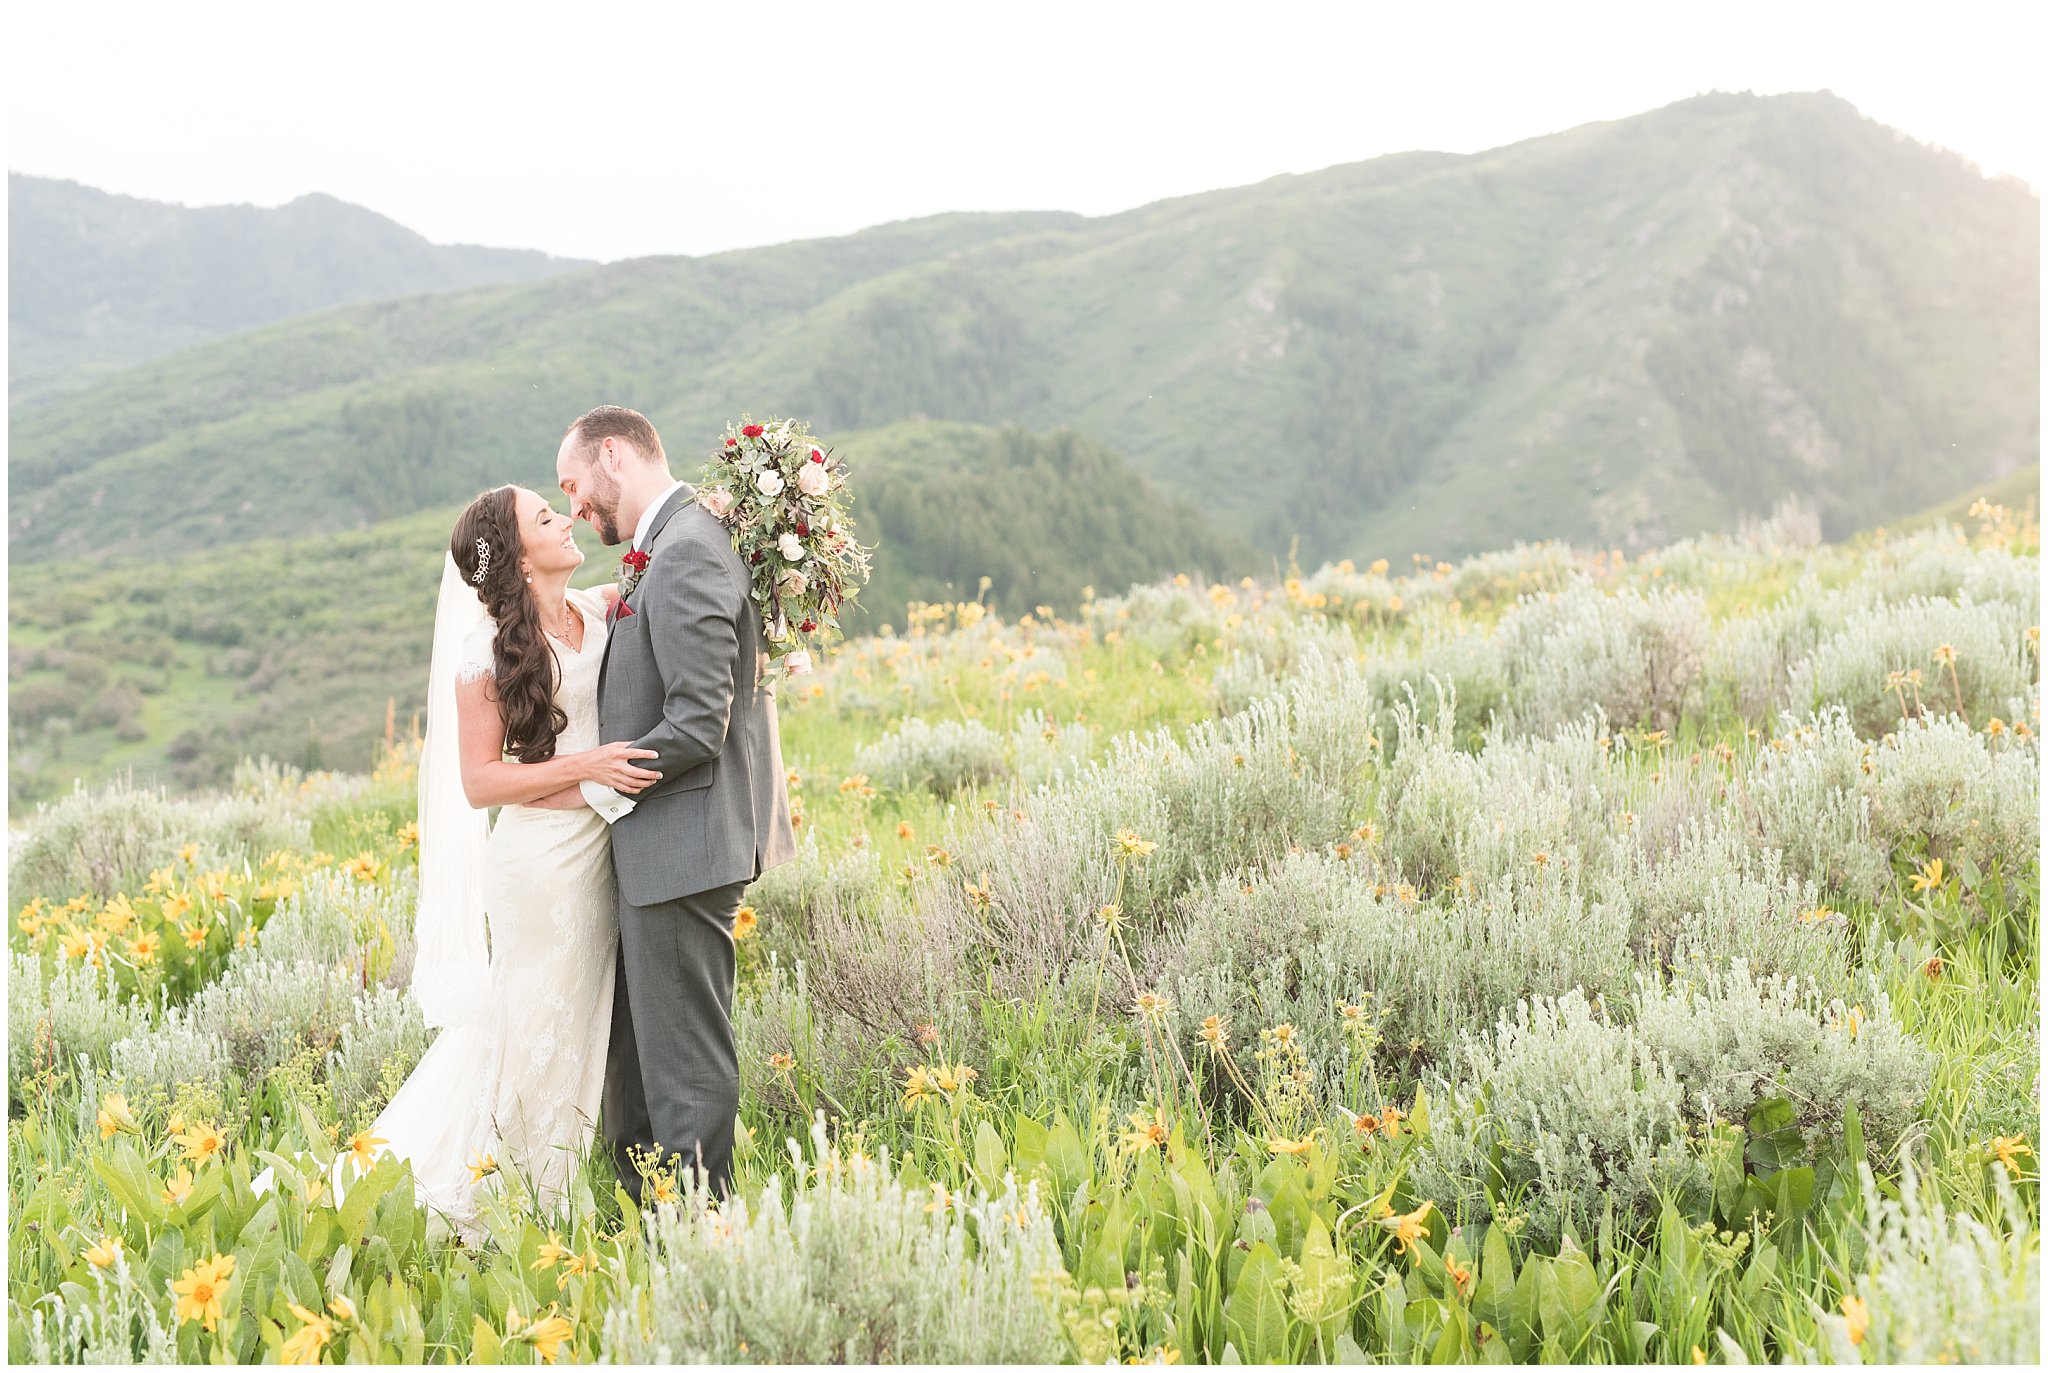 Bride and groom portraits in the mountains | Groom in grey suit and bride in beige and white dress with waterfall bouquet | Snowbasin Summer Formal Session | Utah Wedding Photographers | Jessie and Dallin